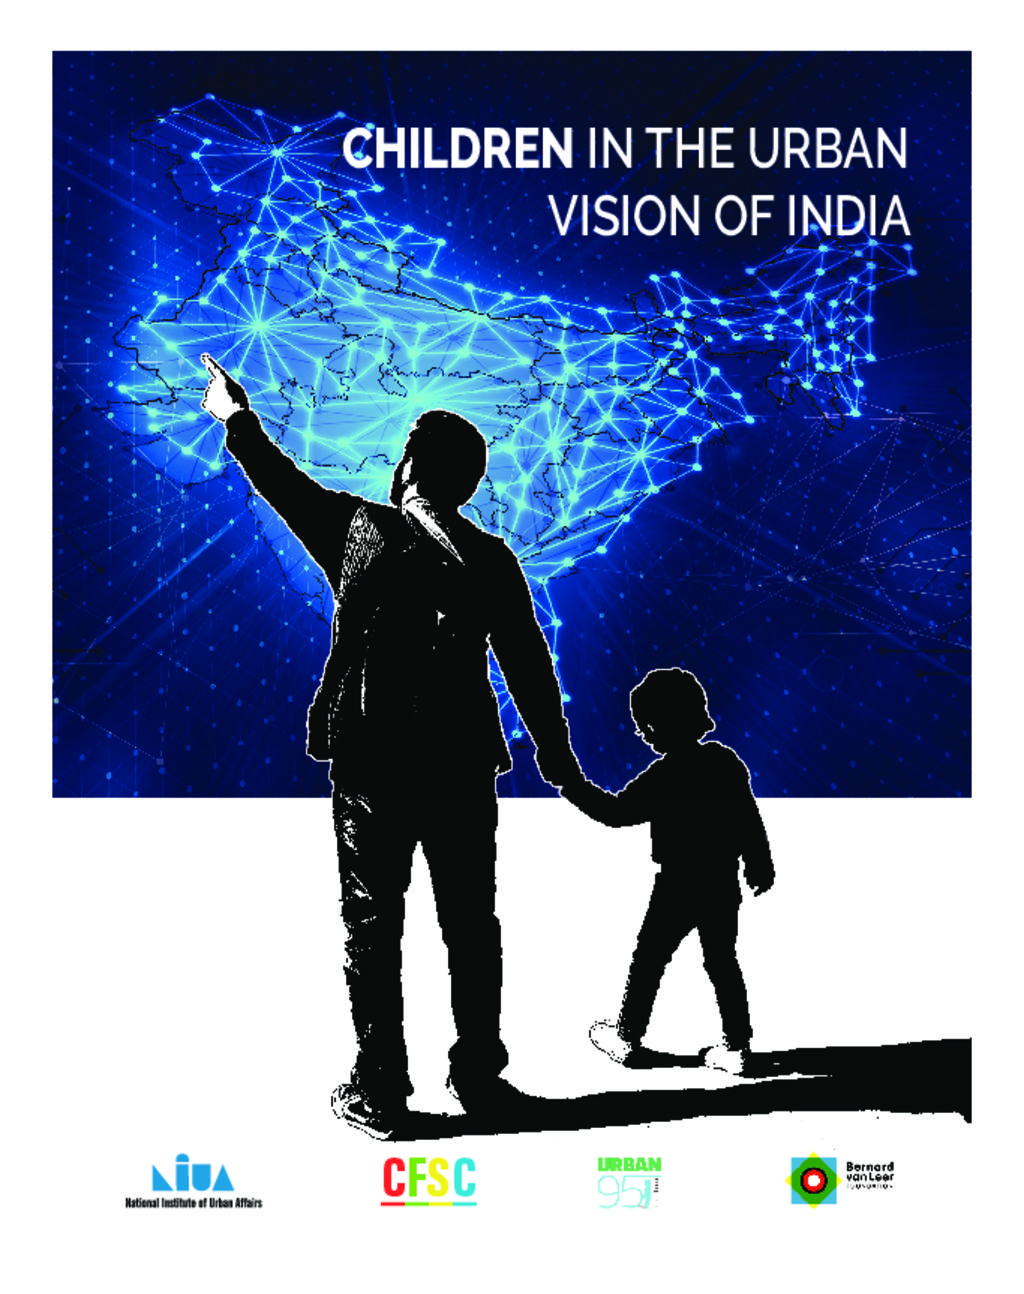 Children in the Vision of India